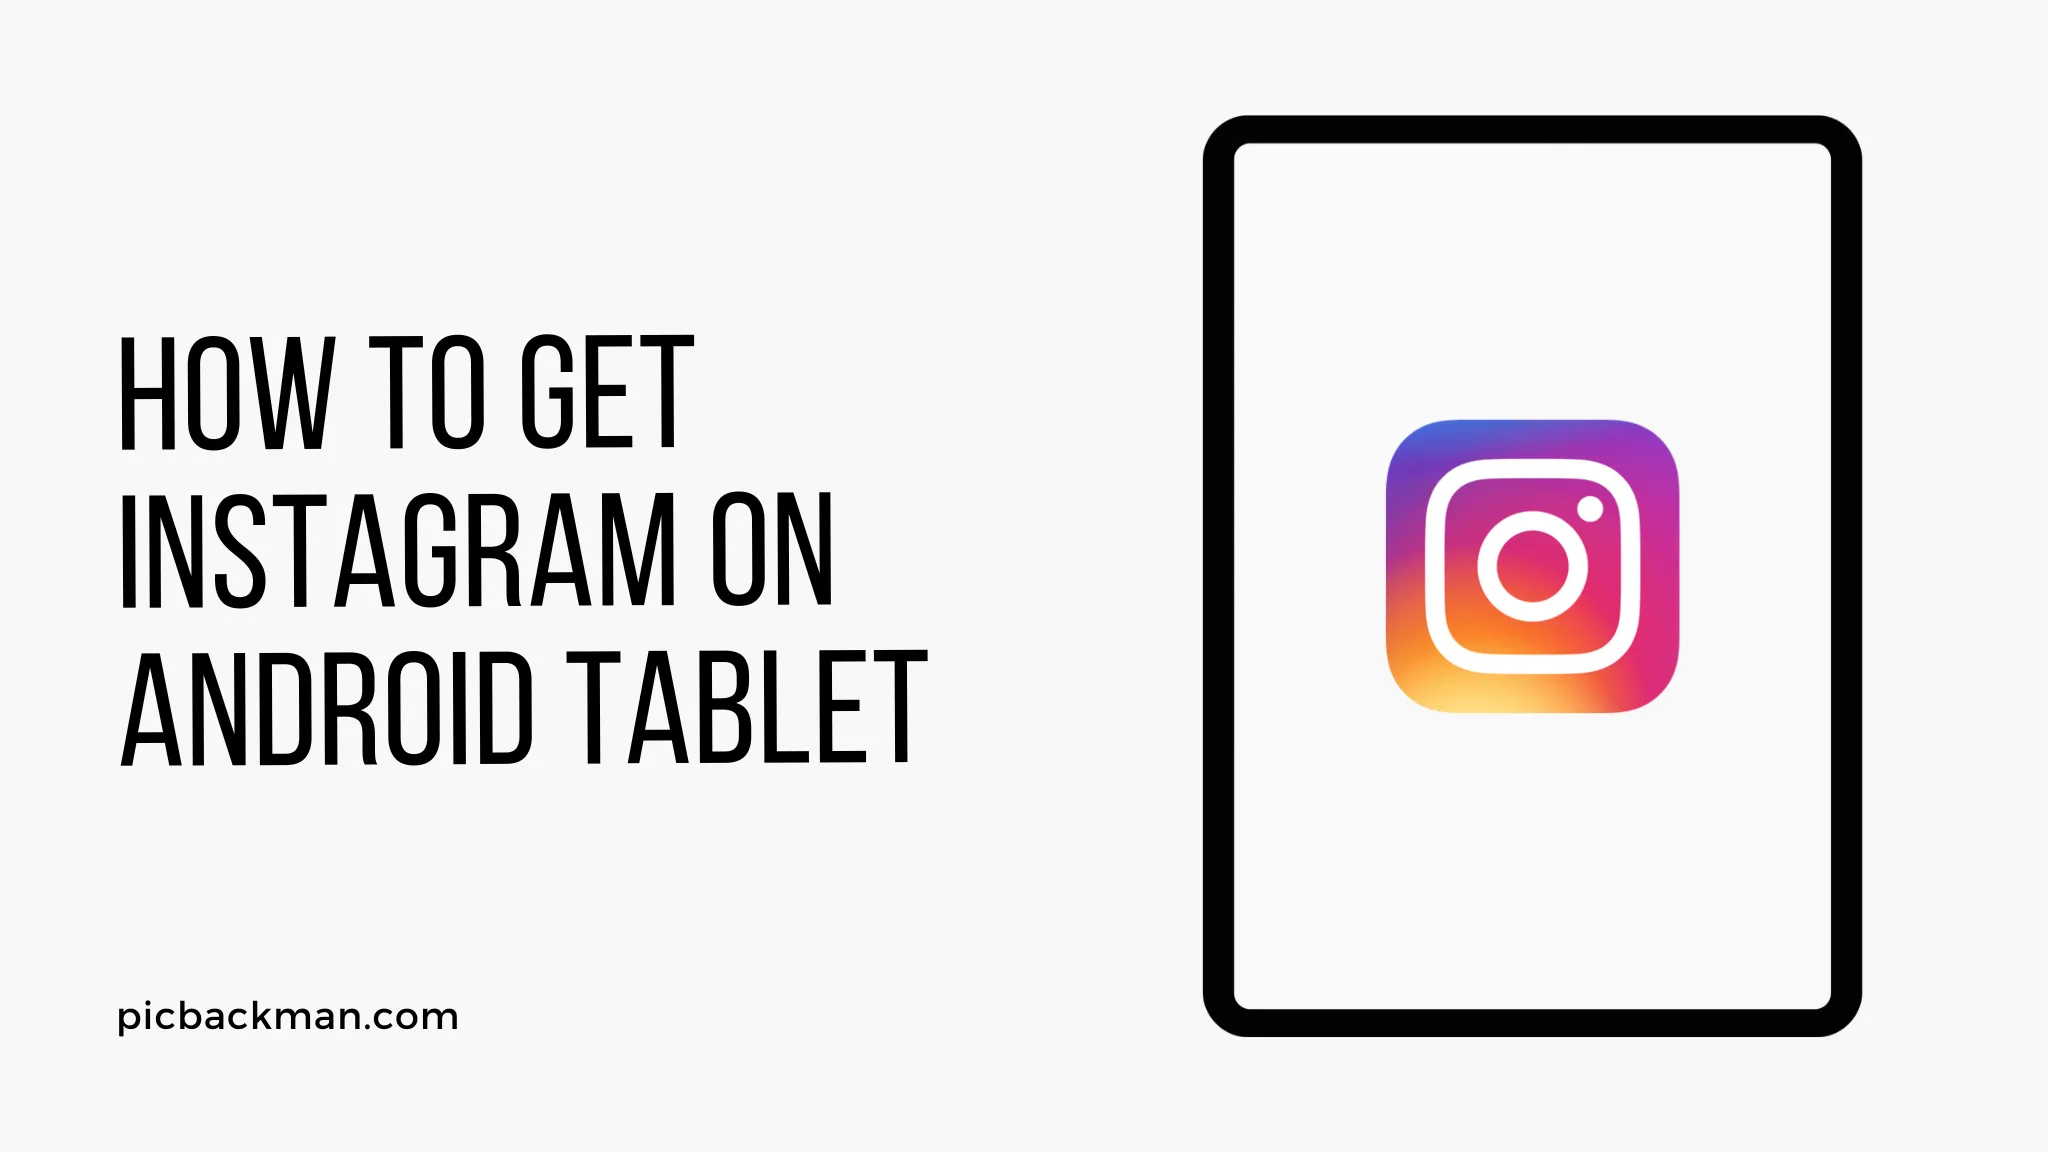 How to get Instagram on Android Tablet?